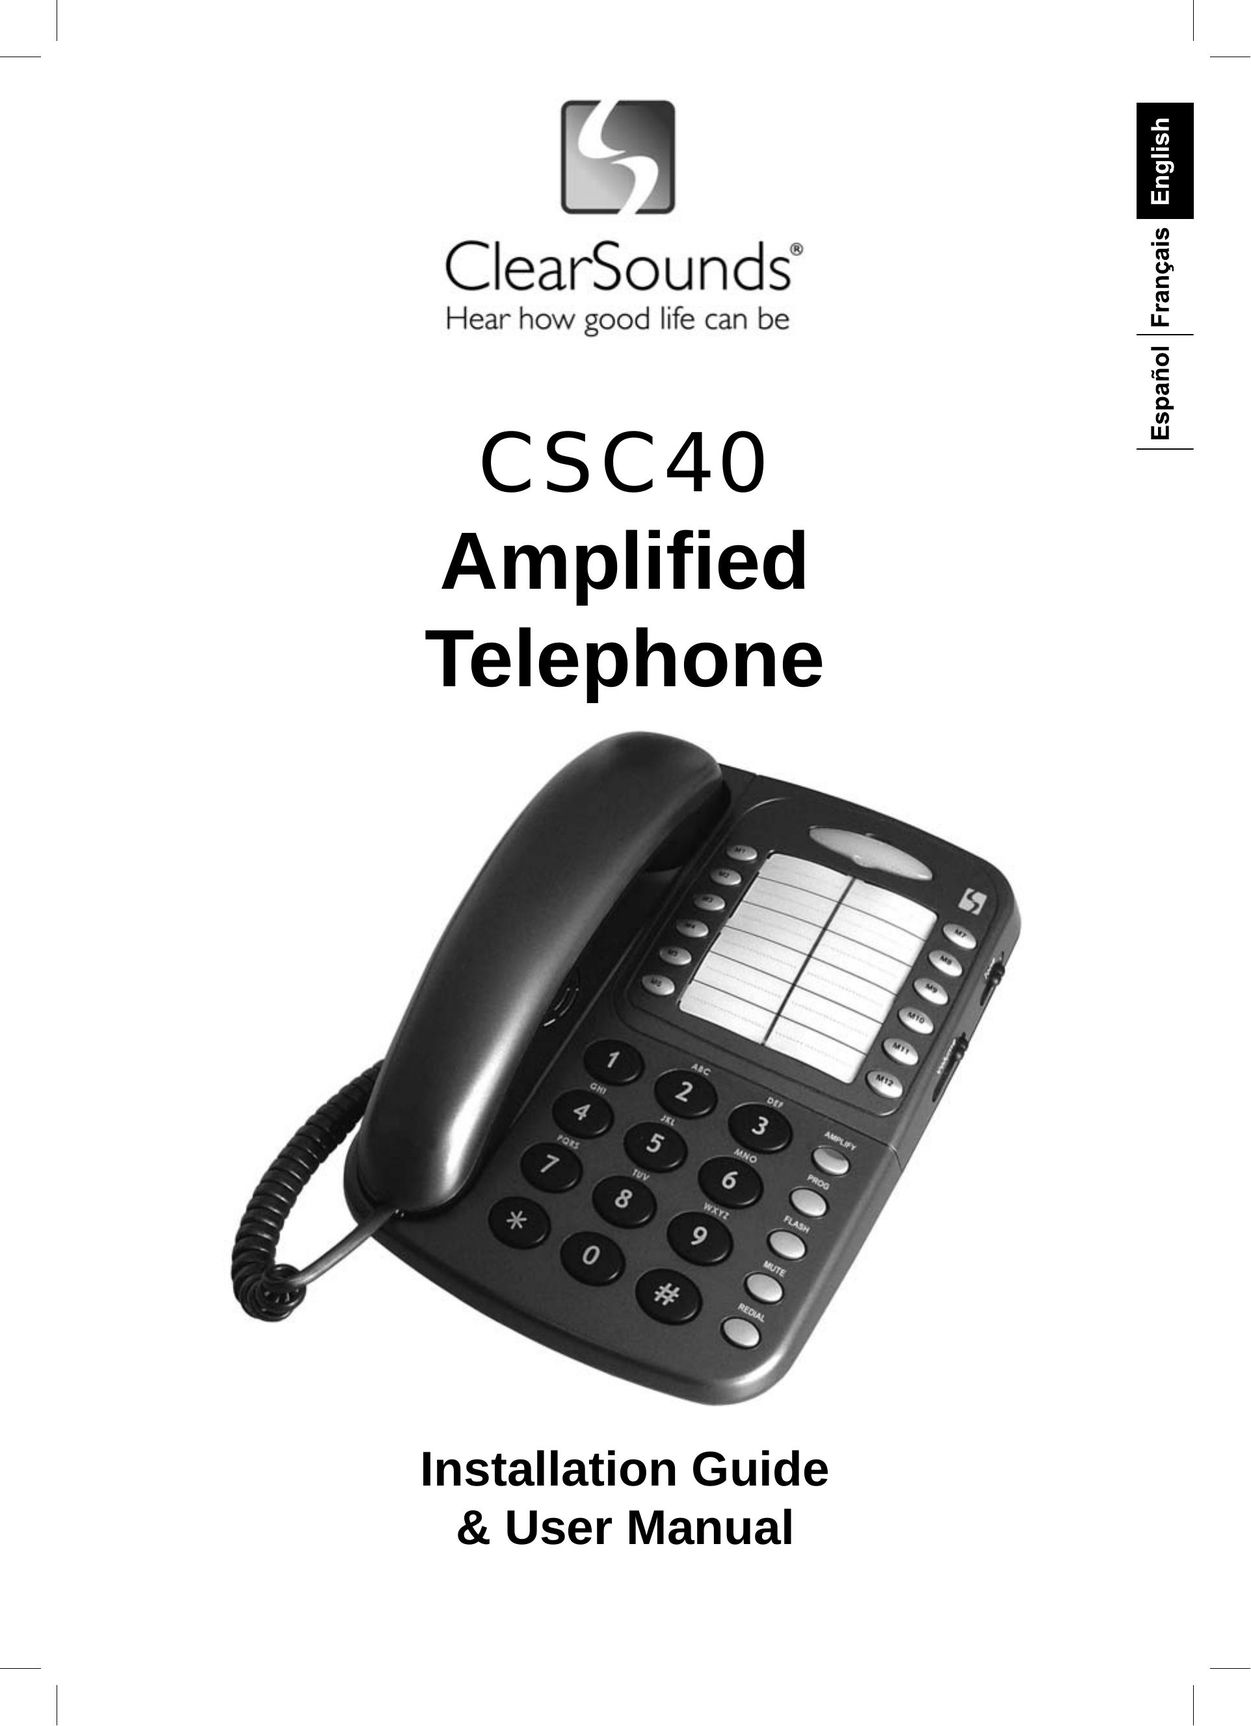 ClearSounds CSC40 Telephone User Manual